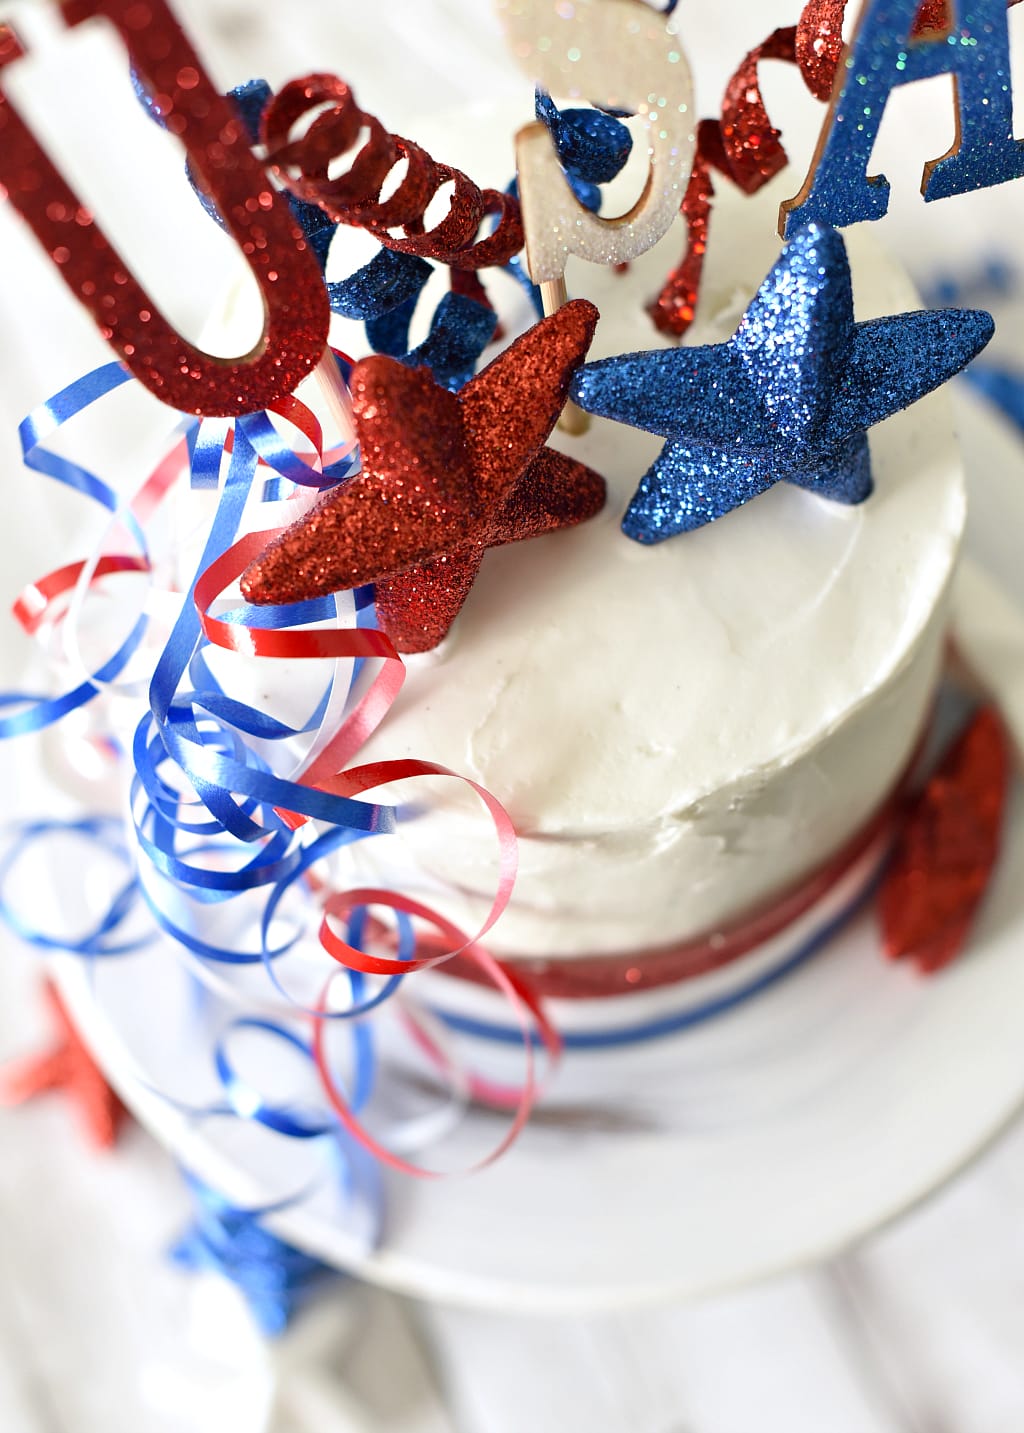 How to Make a Patriotic Cake for the 4th of July